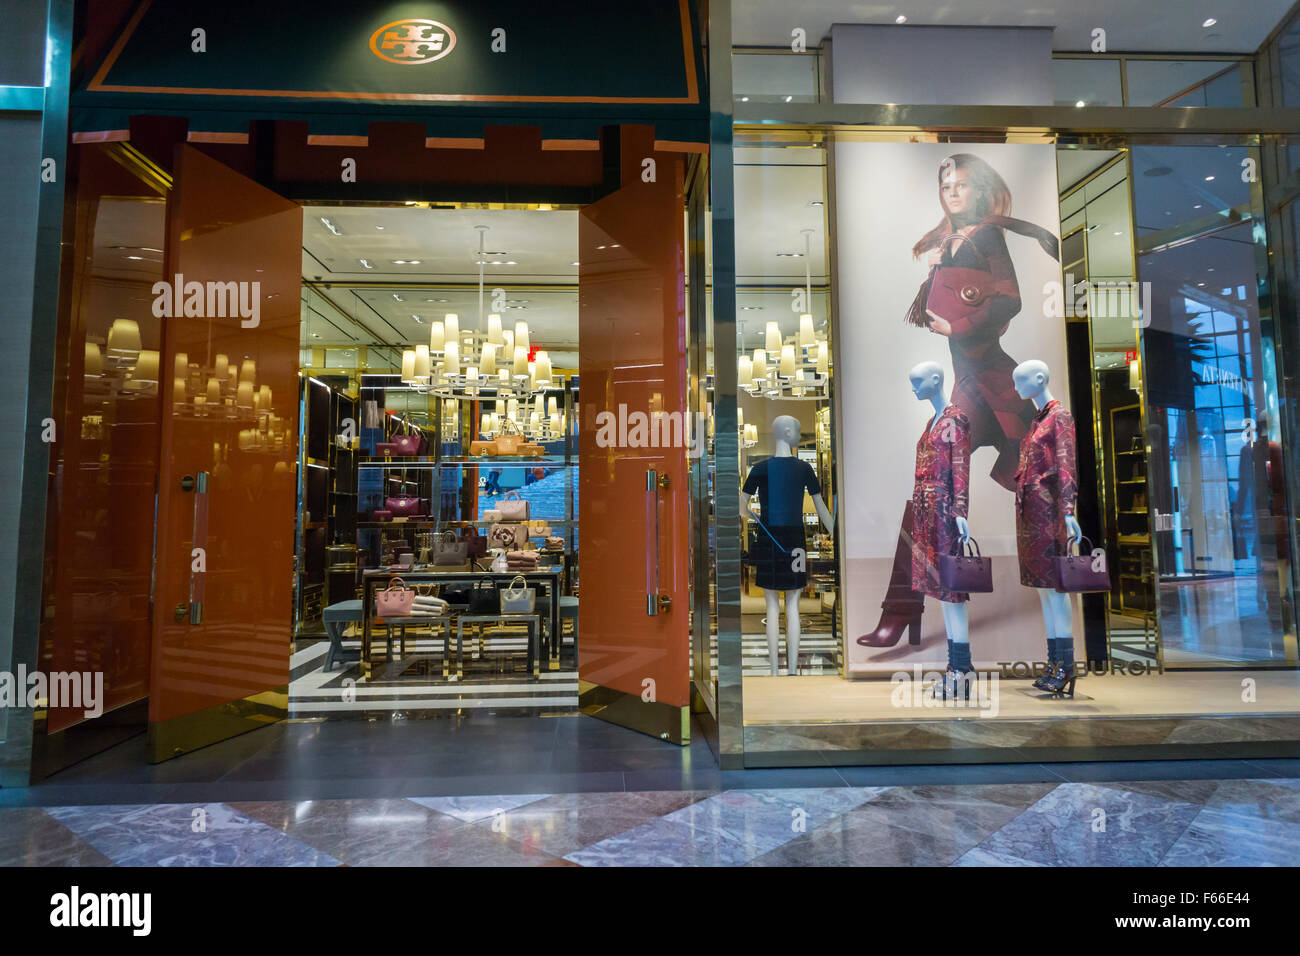 The Tory Burch Store In The Brookfield Place Mall In New York On